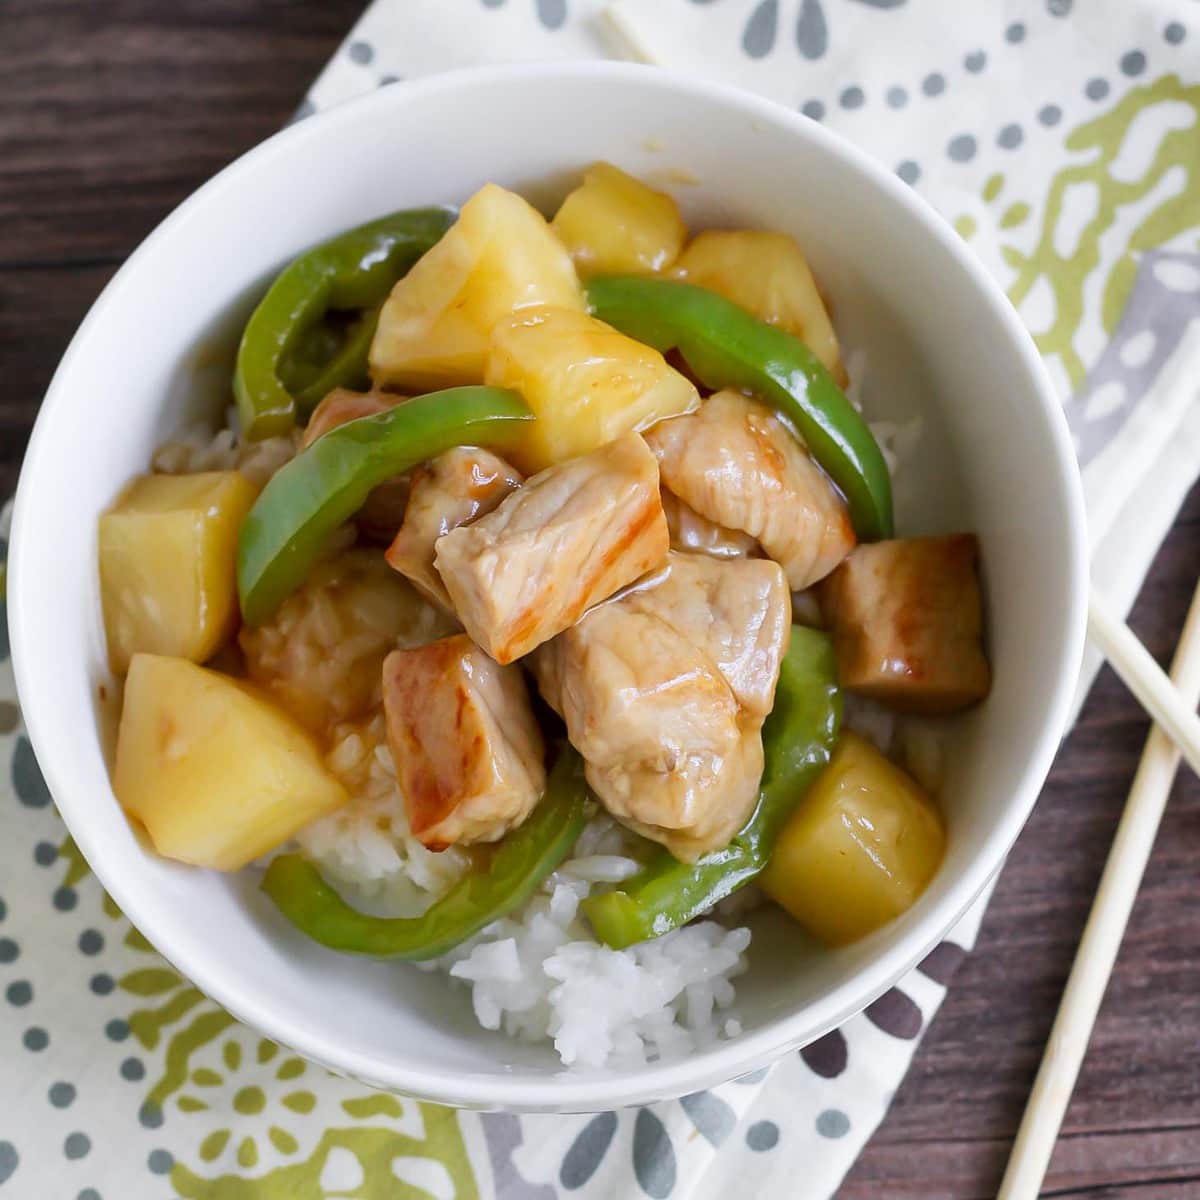 Family Dinner Ideas - Sweet and sour pork in a bowl with white rice.